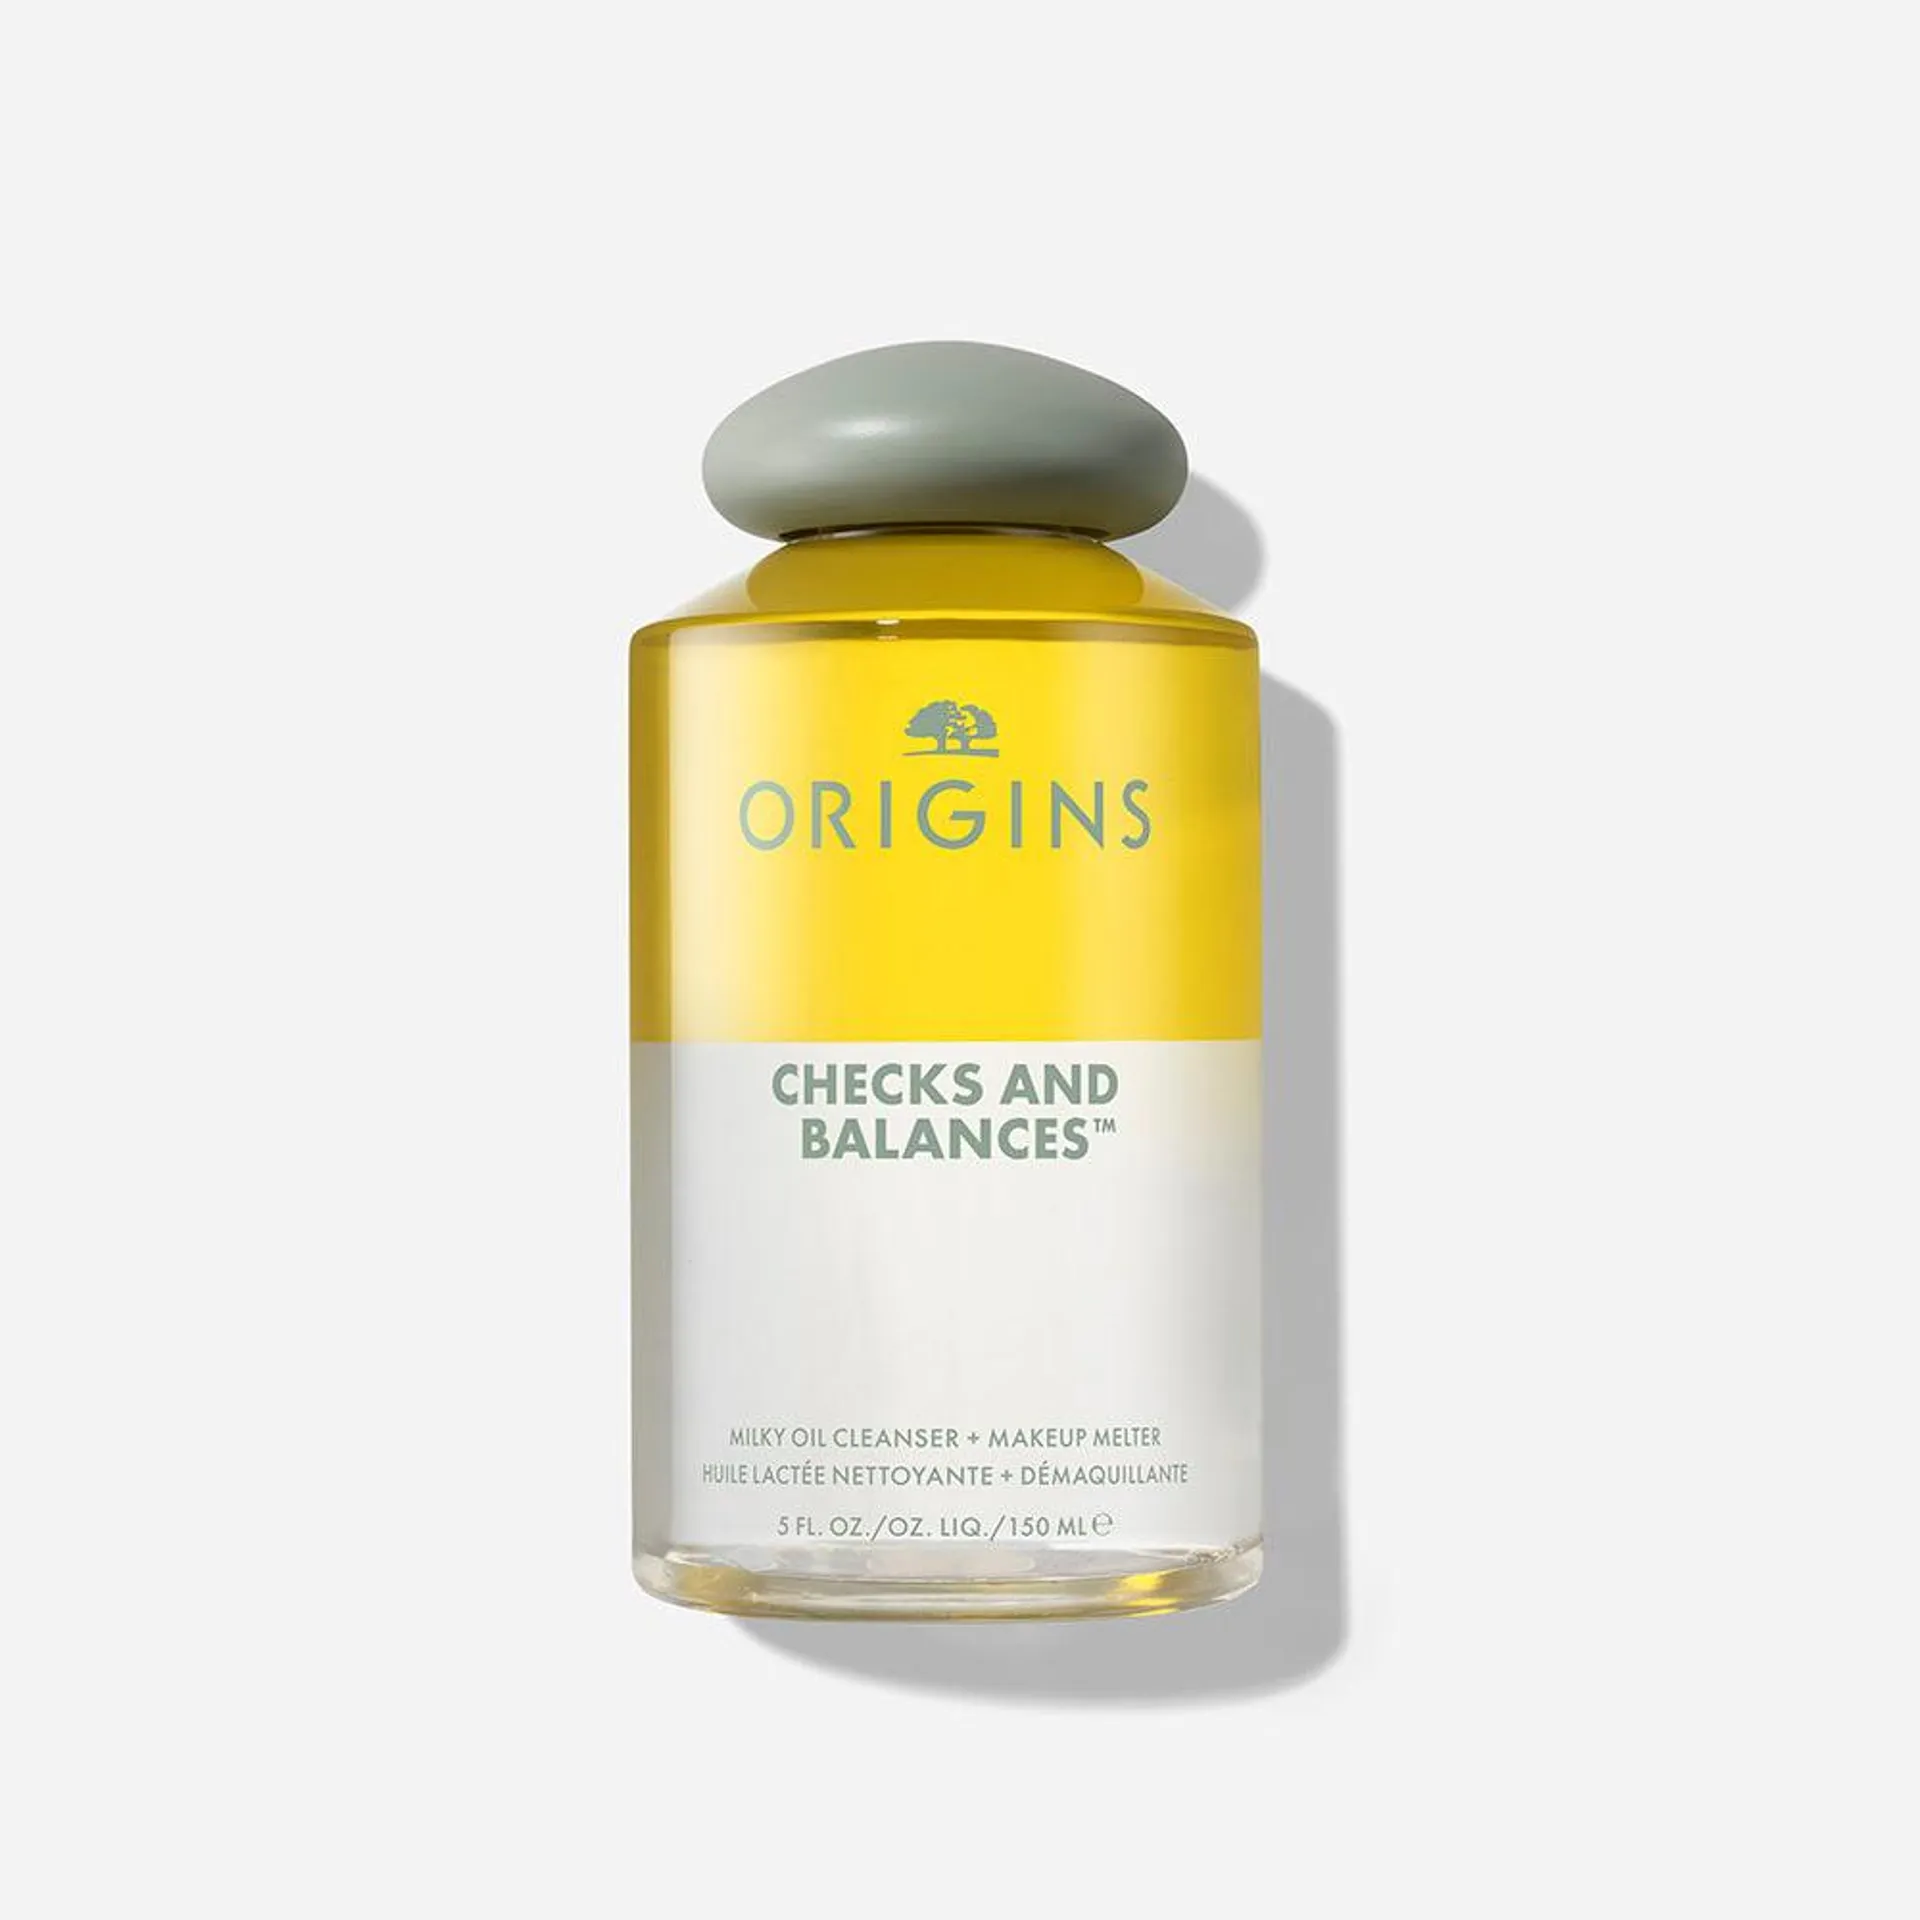 Checks and Balances™ Milky Oil Cleanser + Makeup Melter